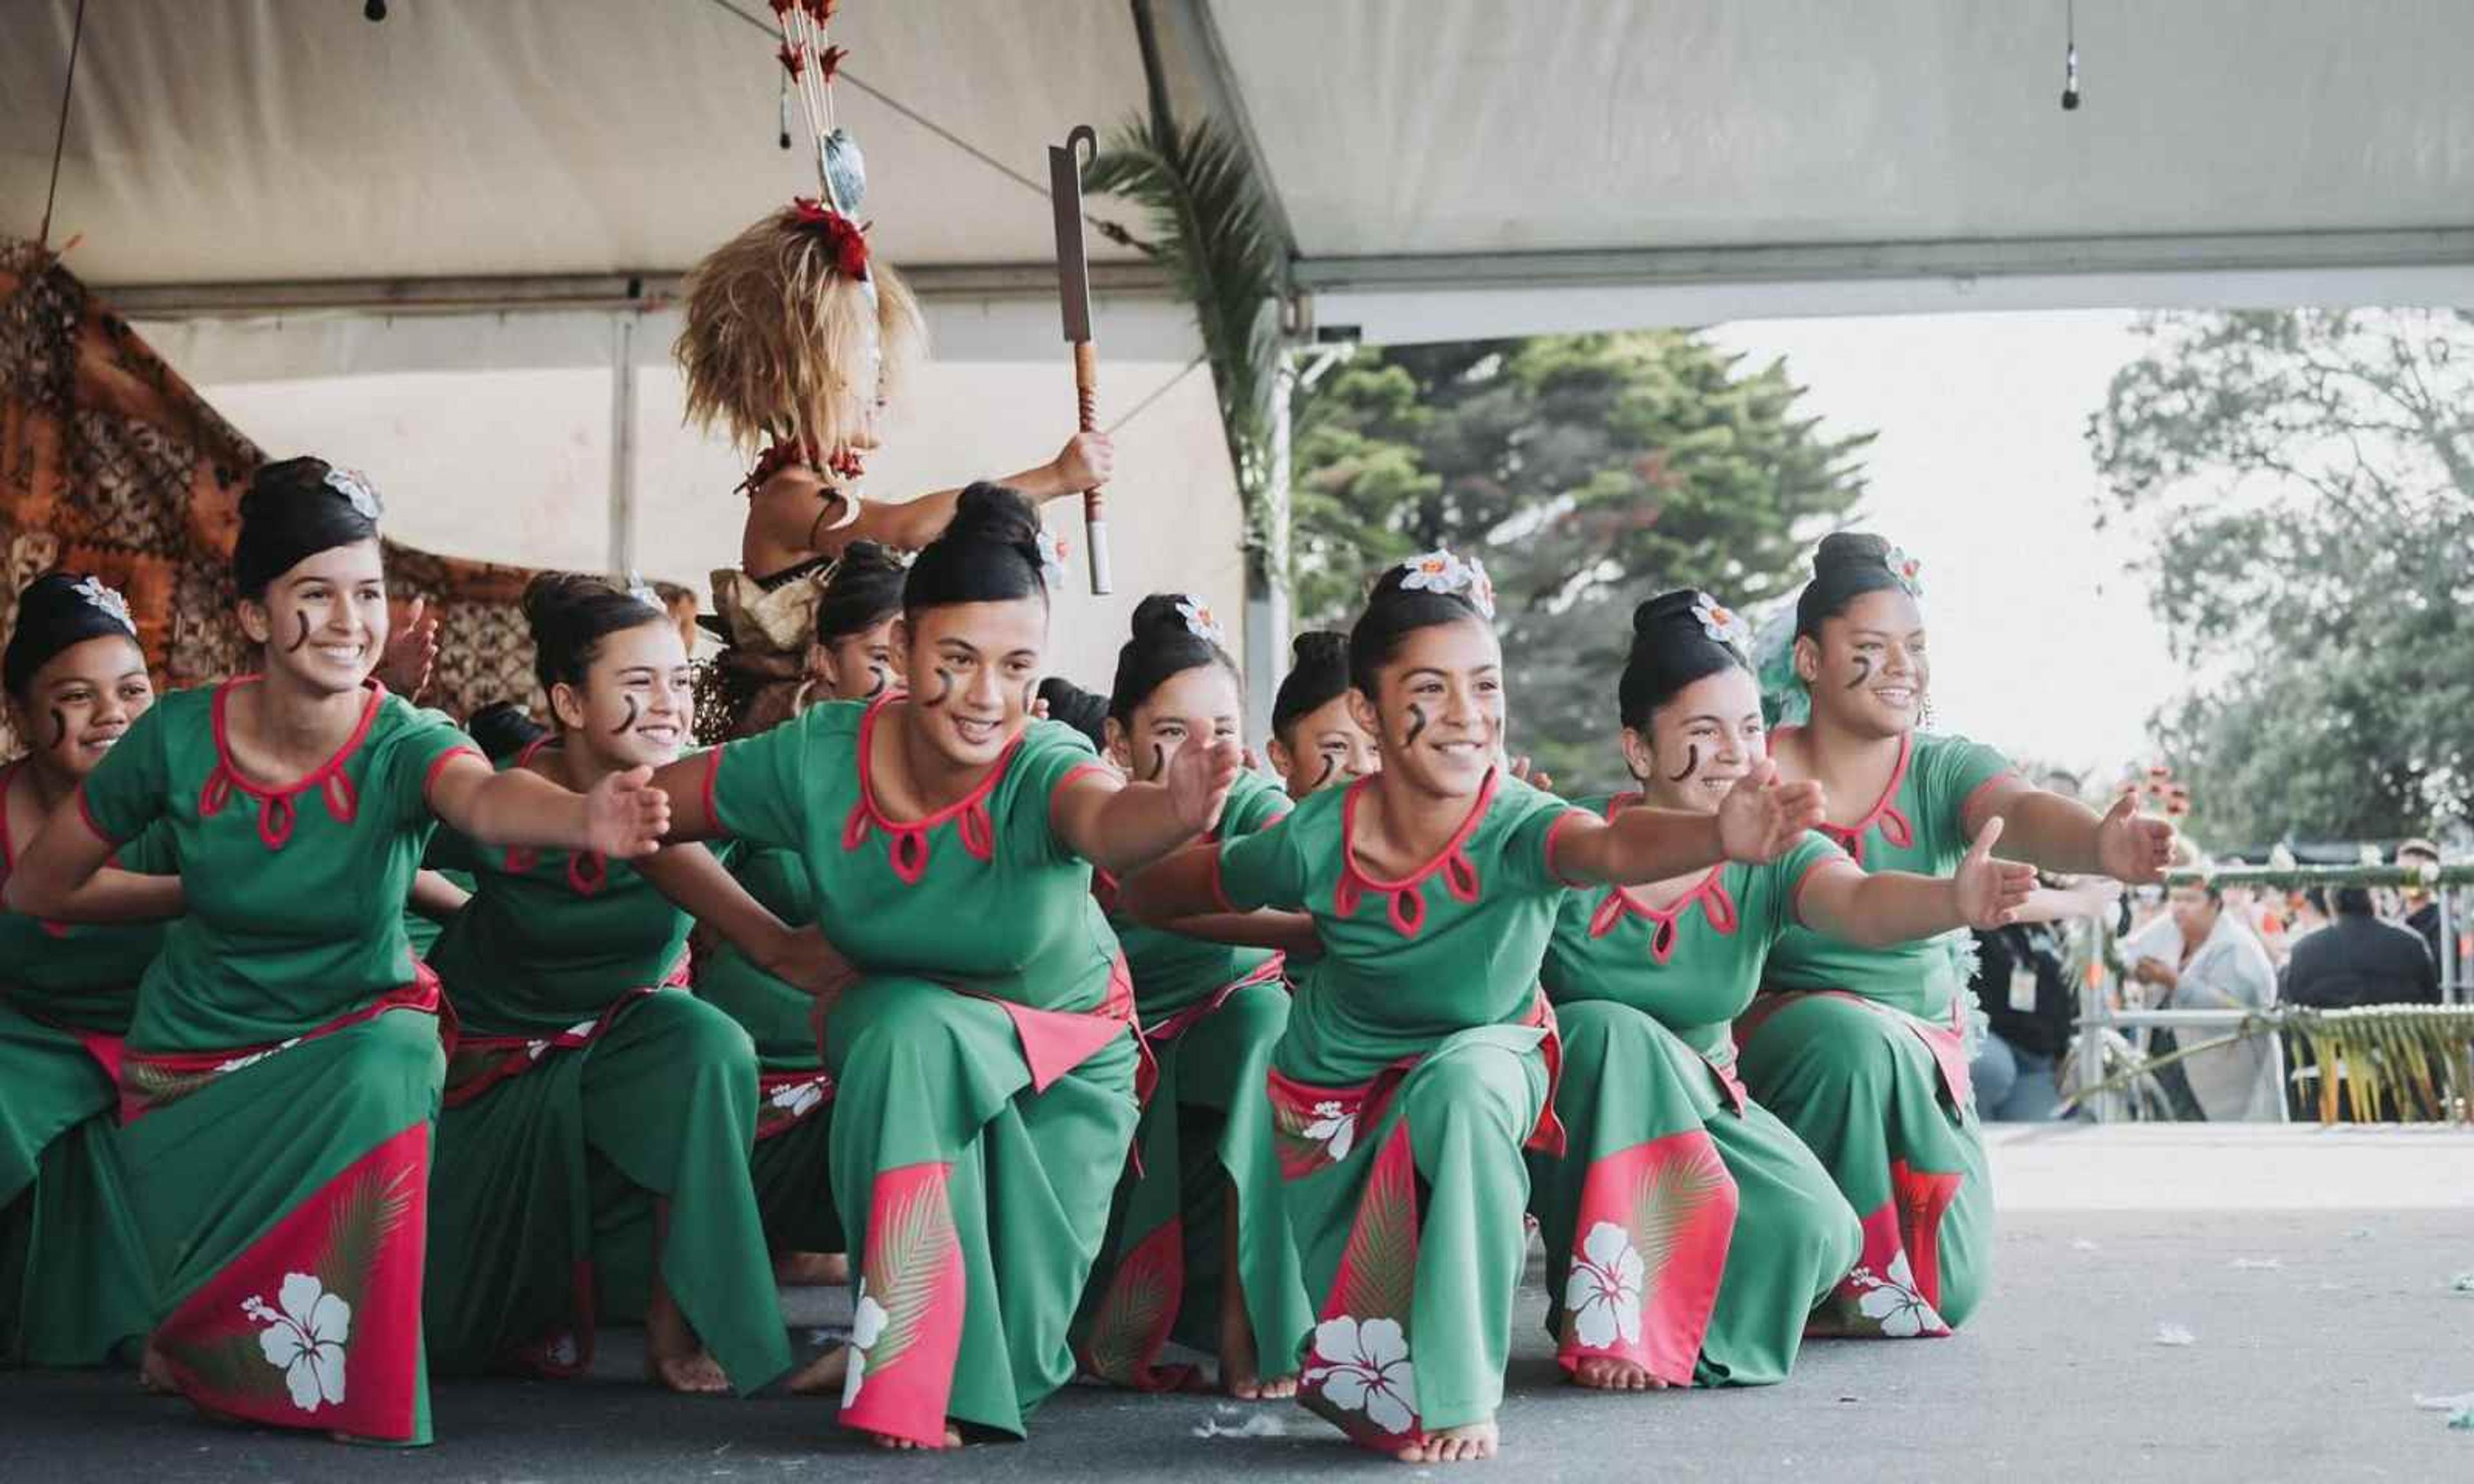 Hundreds of high schoolers performed at the 49th ASB Polyfest to thousands of people who gathered at the Manukau Sports Bowl last week.